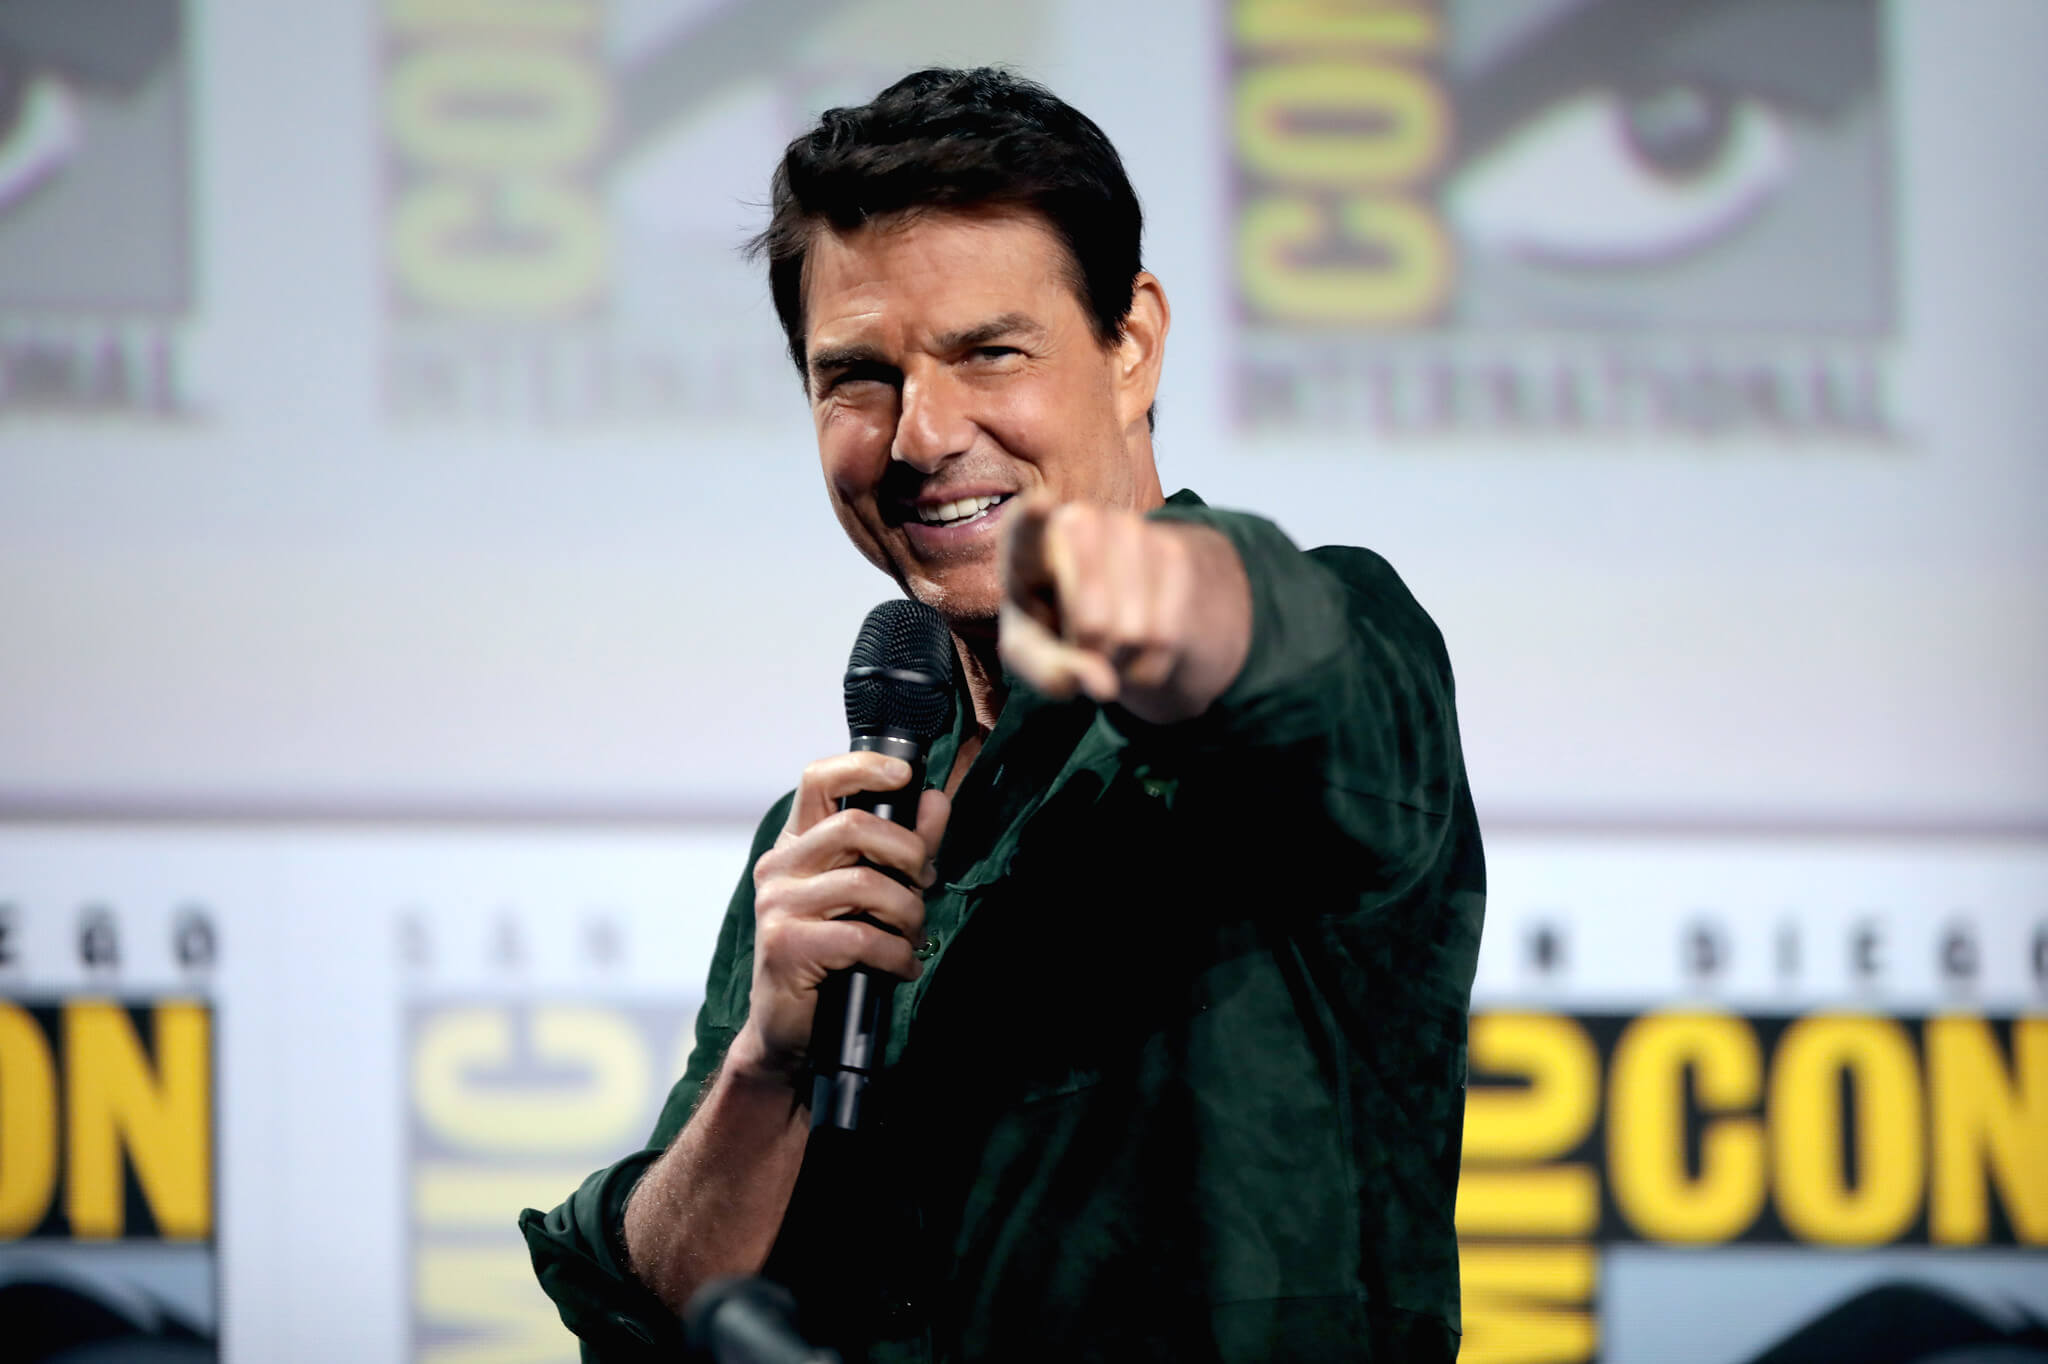 Auge - Tom Cruise speaking at the 2019 San Diego Comic Con International, for Top Gun Maverick, at the San Diego Convention Center in San Diego, California. Gage Skidmore - Flickr 